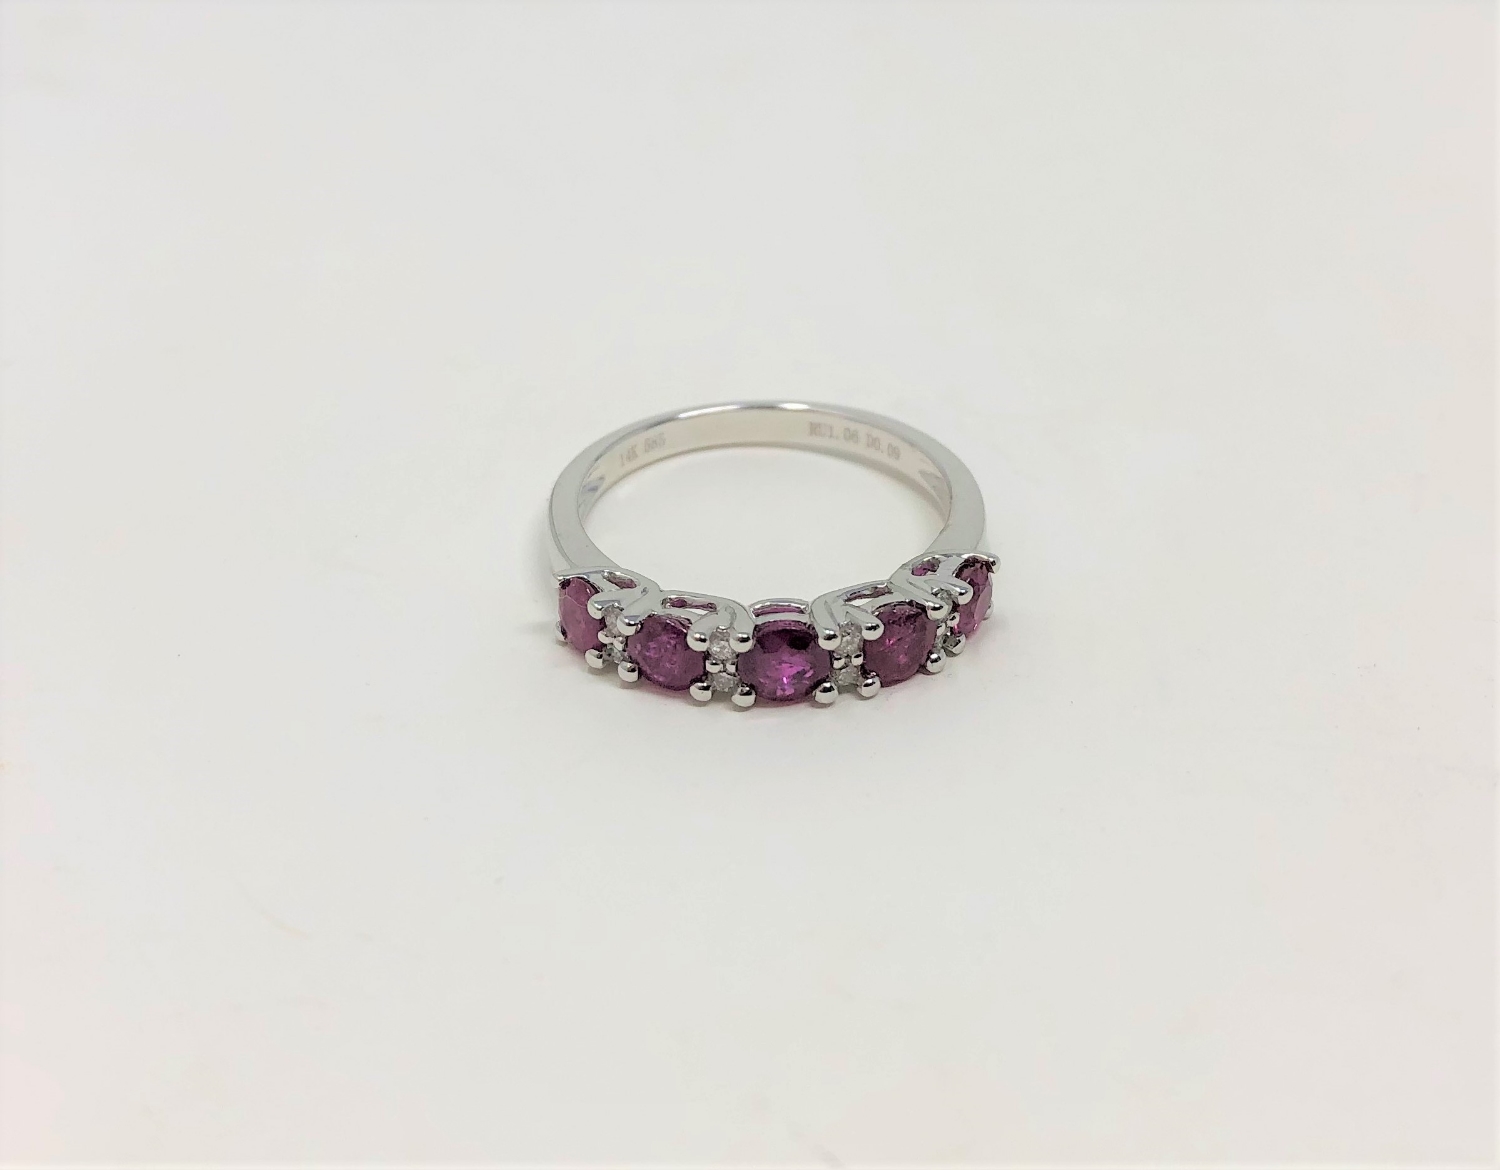 A 14ct white gold ruby and diamond ring, featuring five round cut rubies (1.